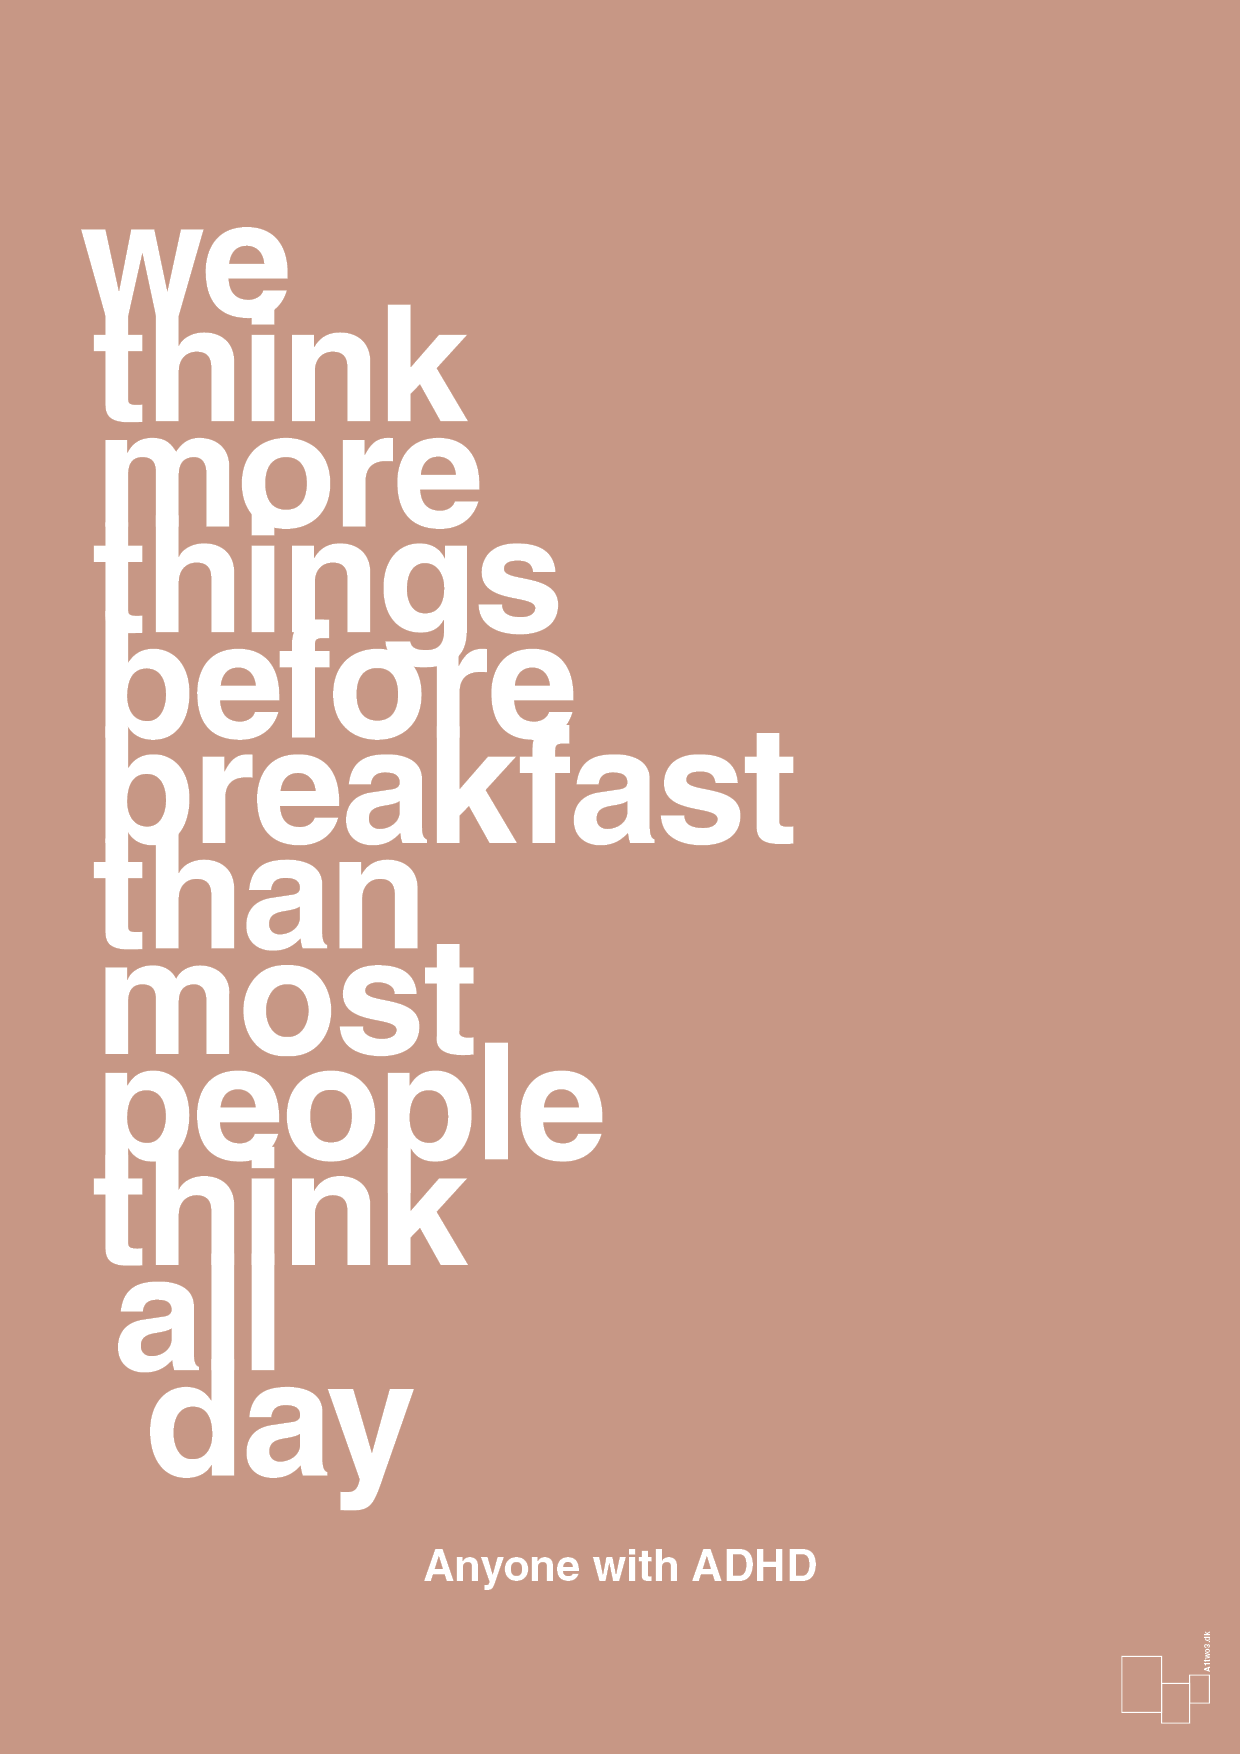 we think more things before breakfast than most people think all day - Plakat med Samfund i Powder